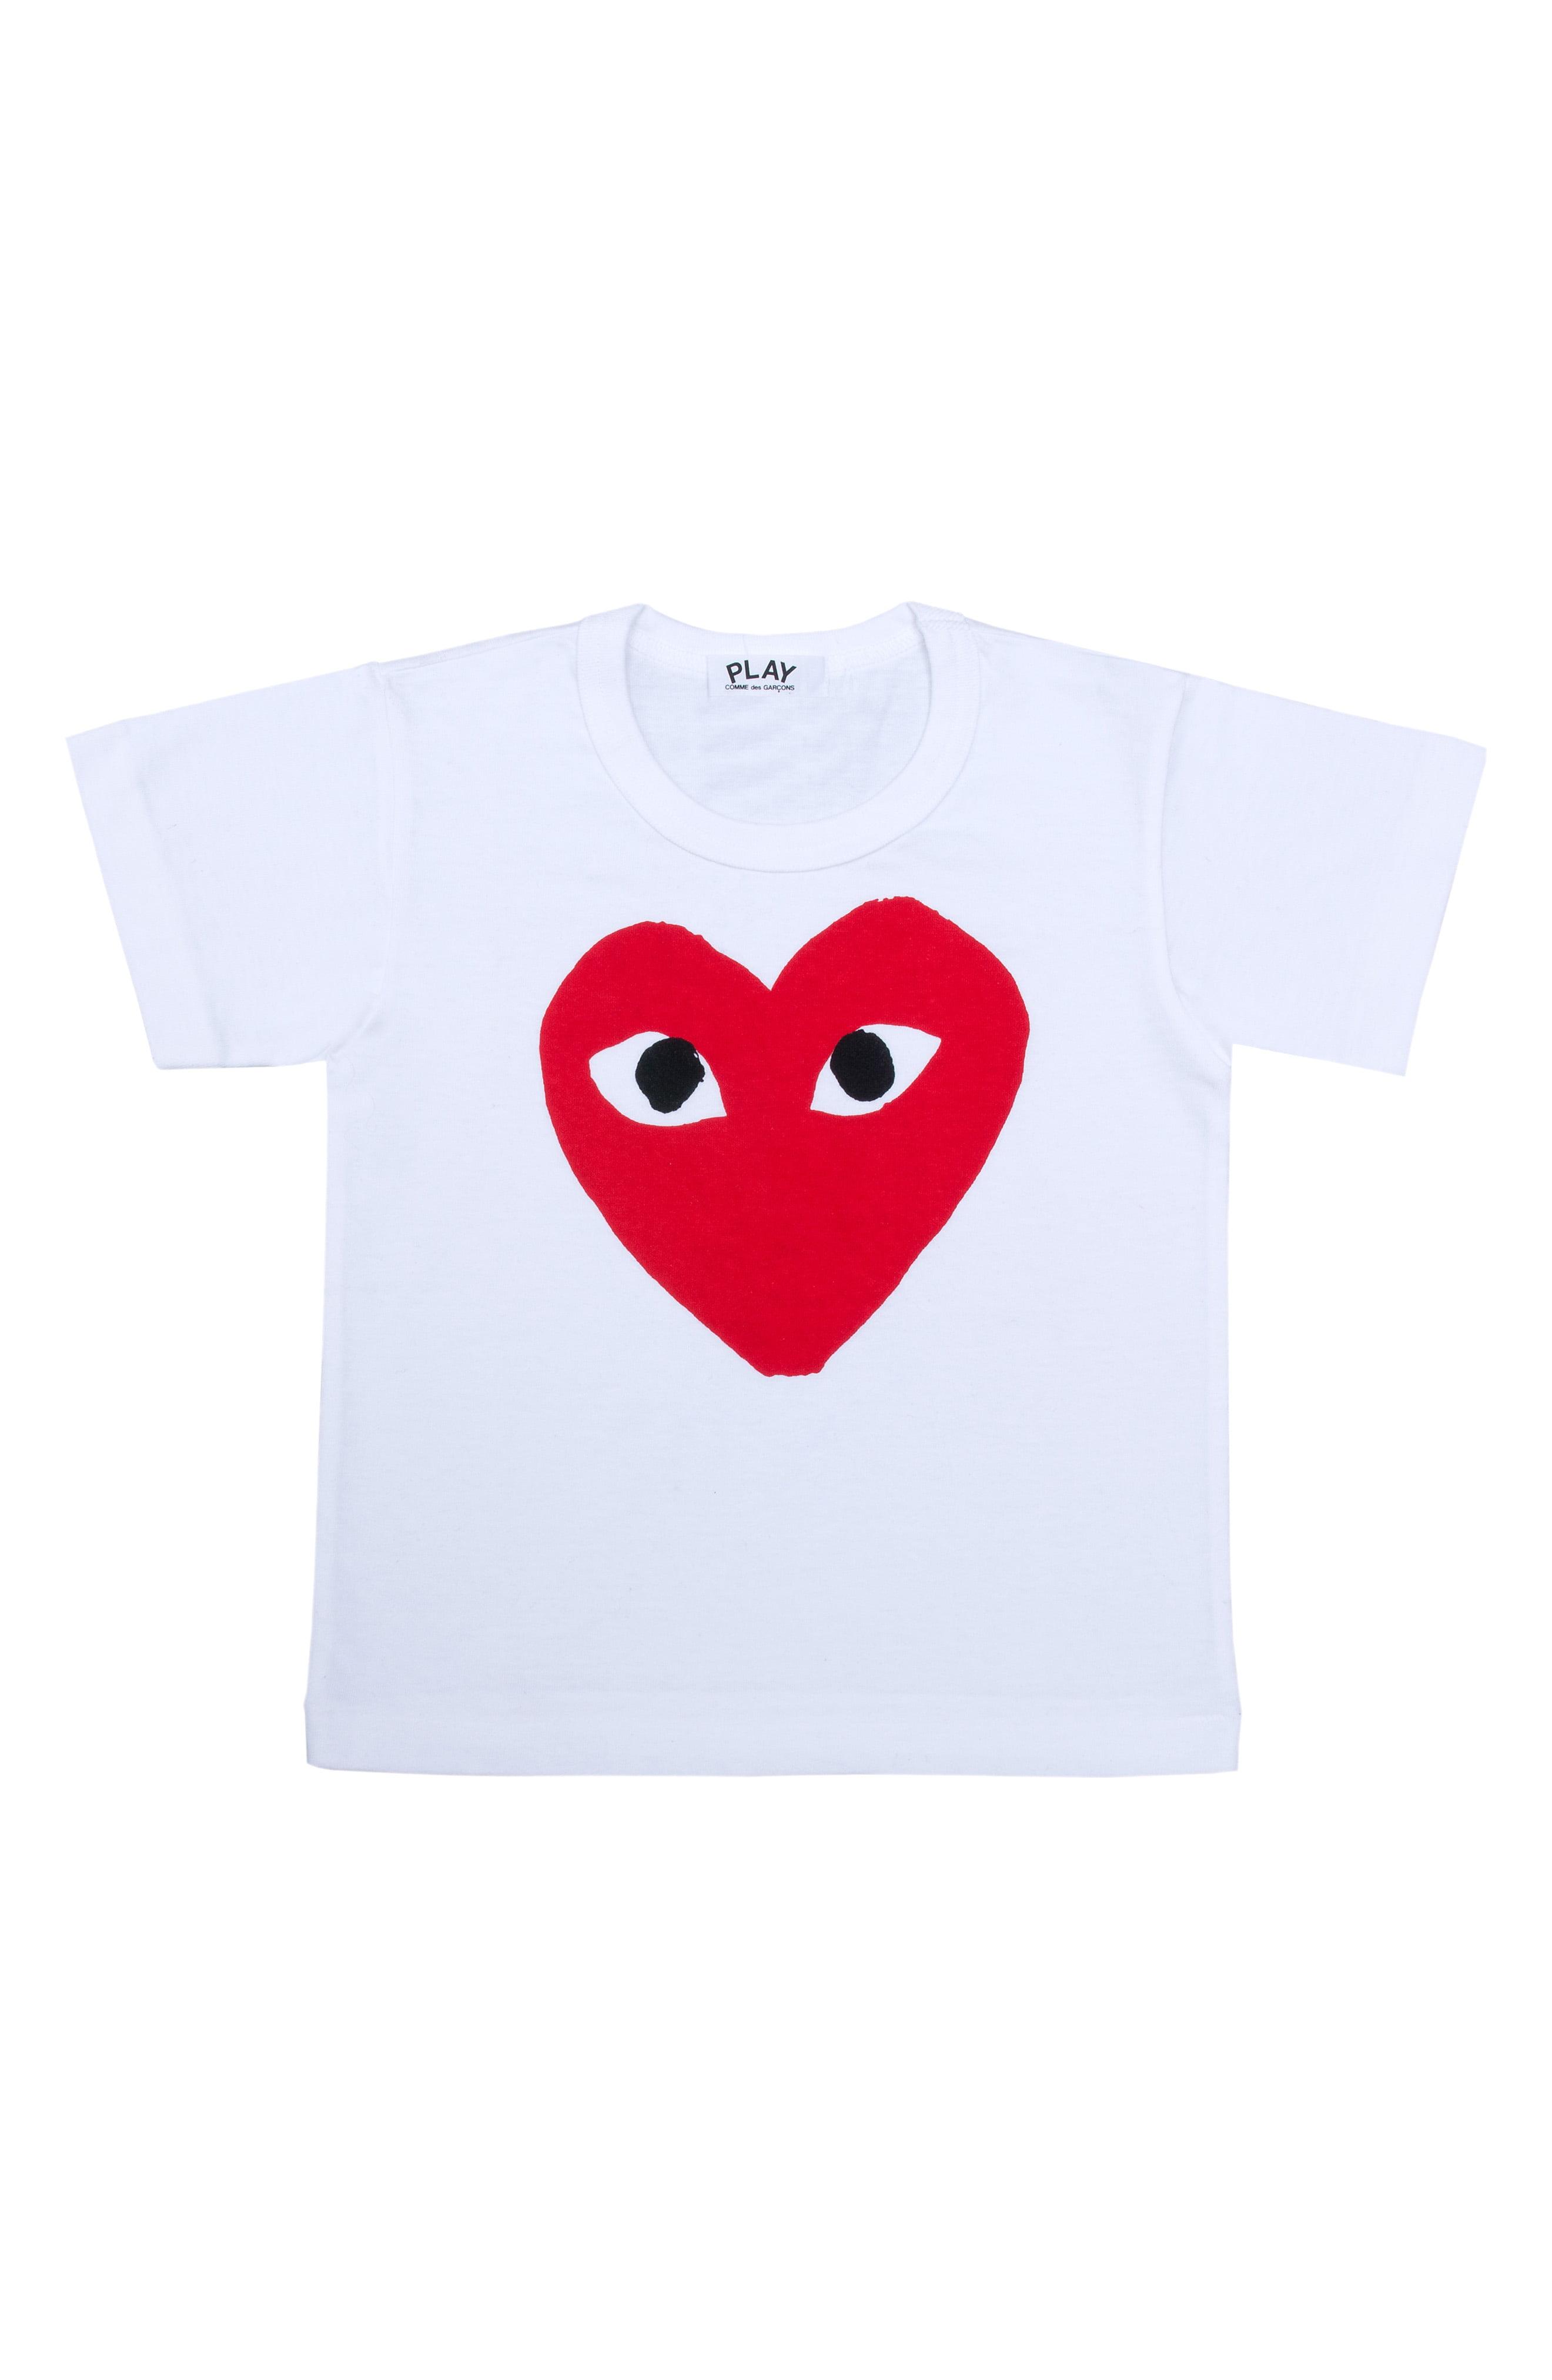 Lyst - Comme des GarÃ§ons Play Heart Face Graphic T-shirt in White